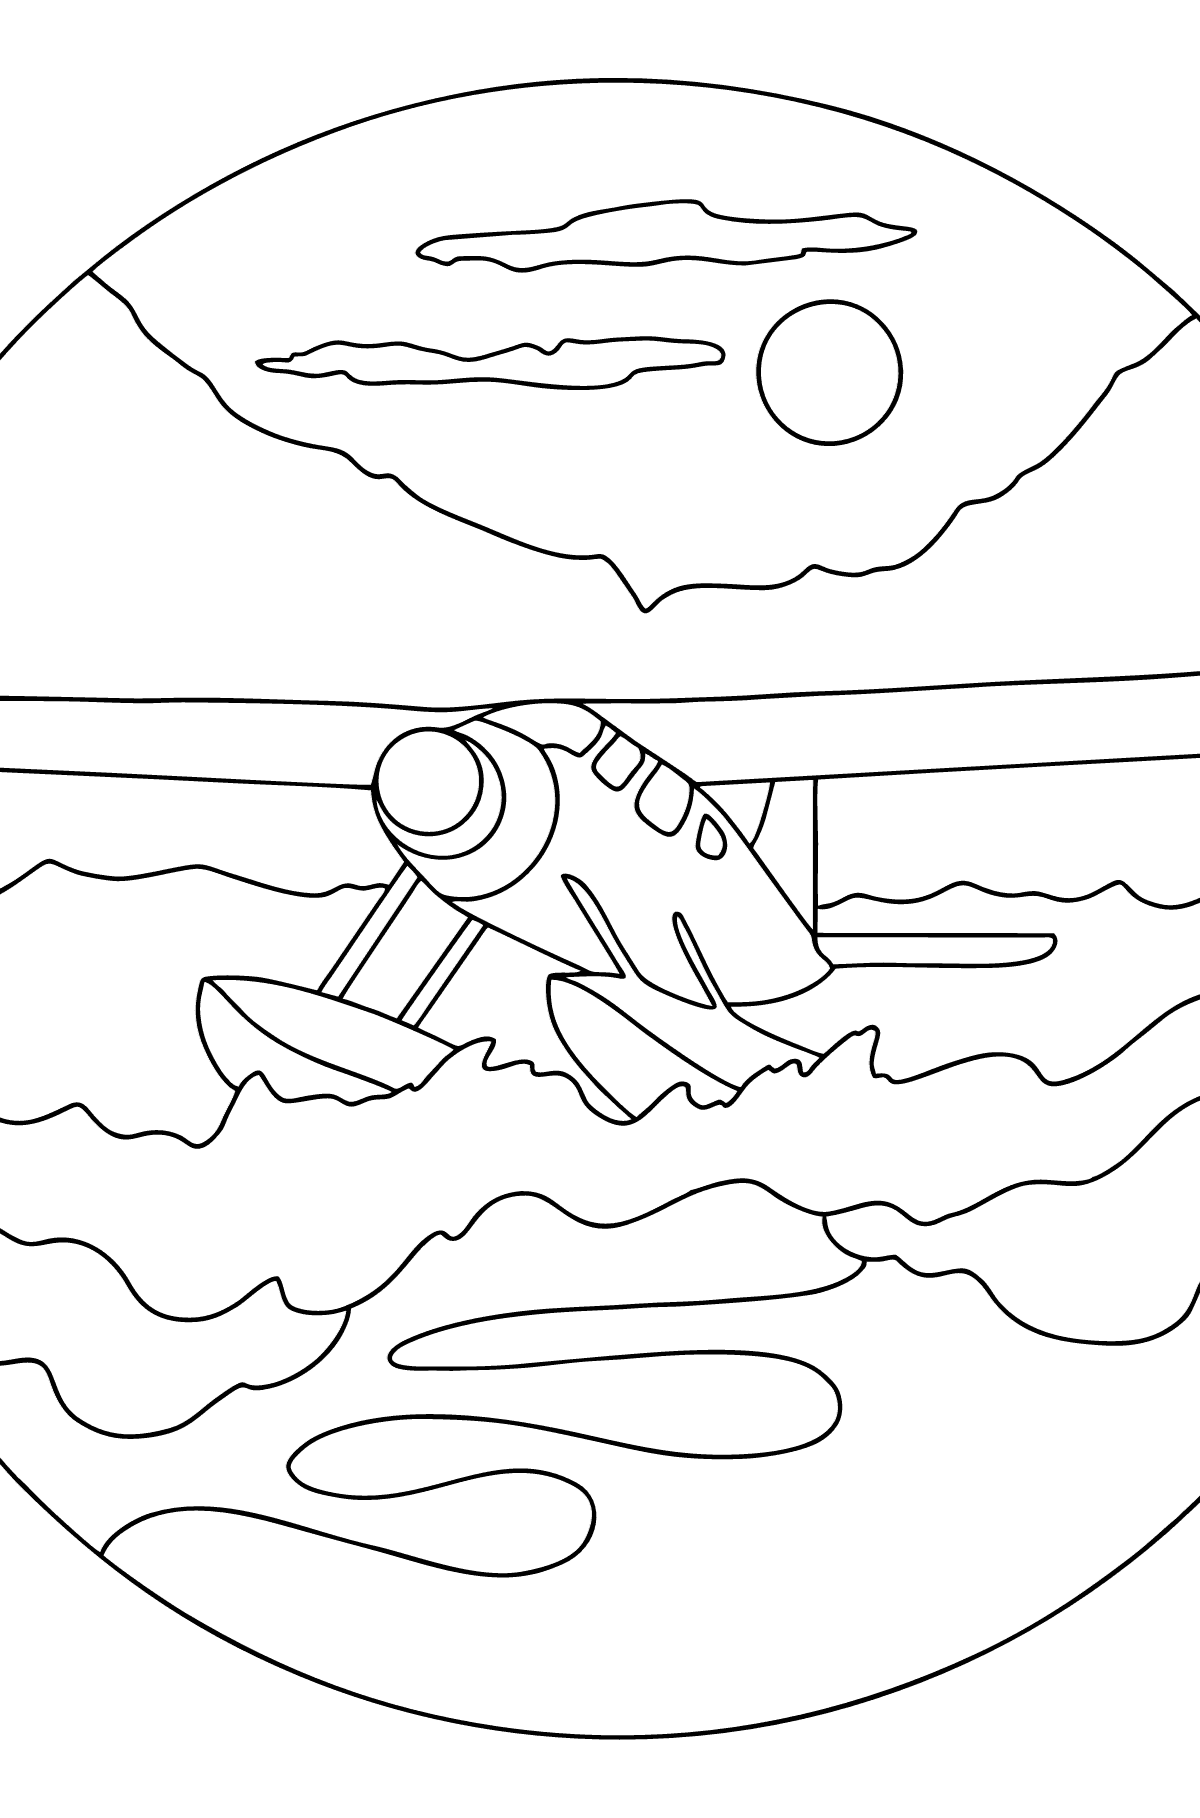 Coloring Page - A Hydroplane - Coloring Pages for Children